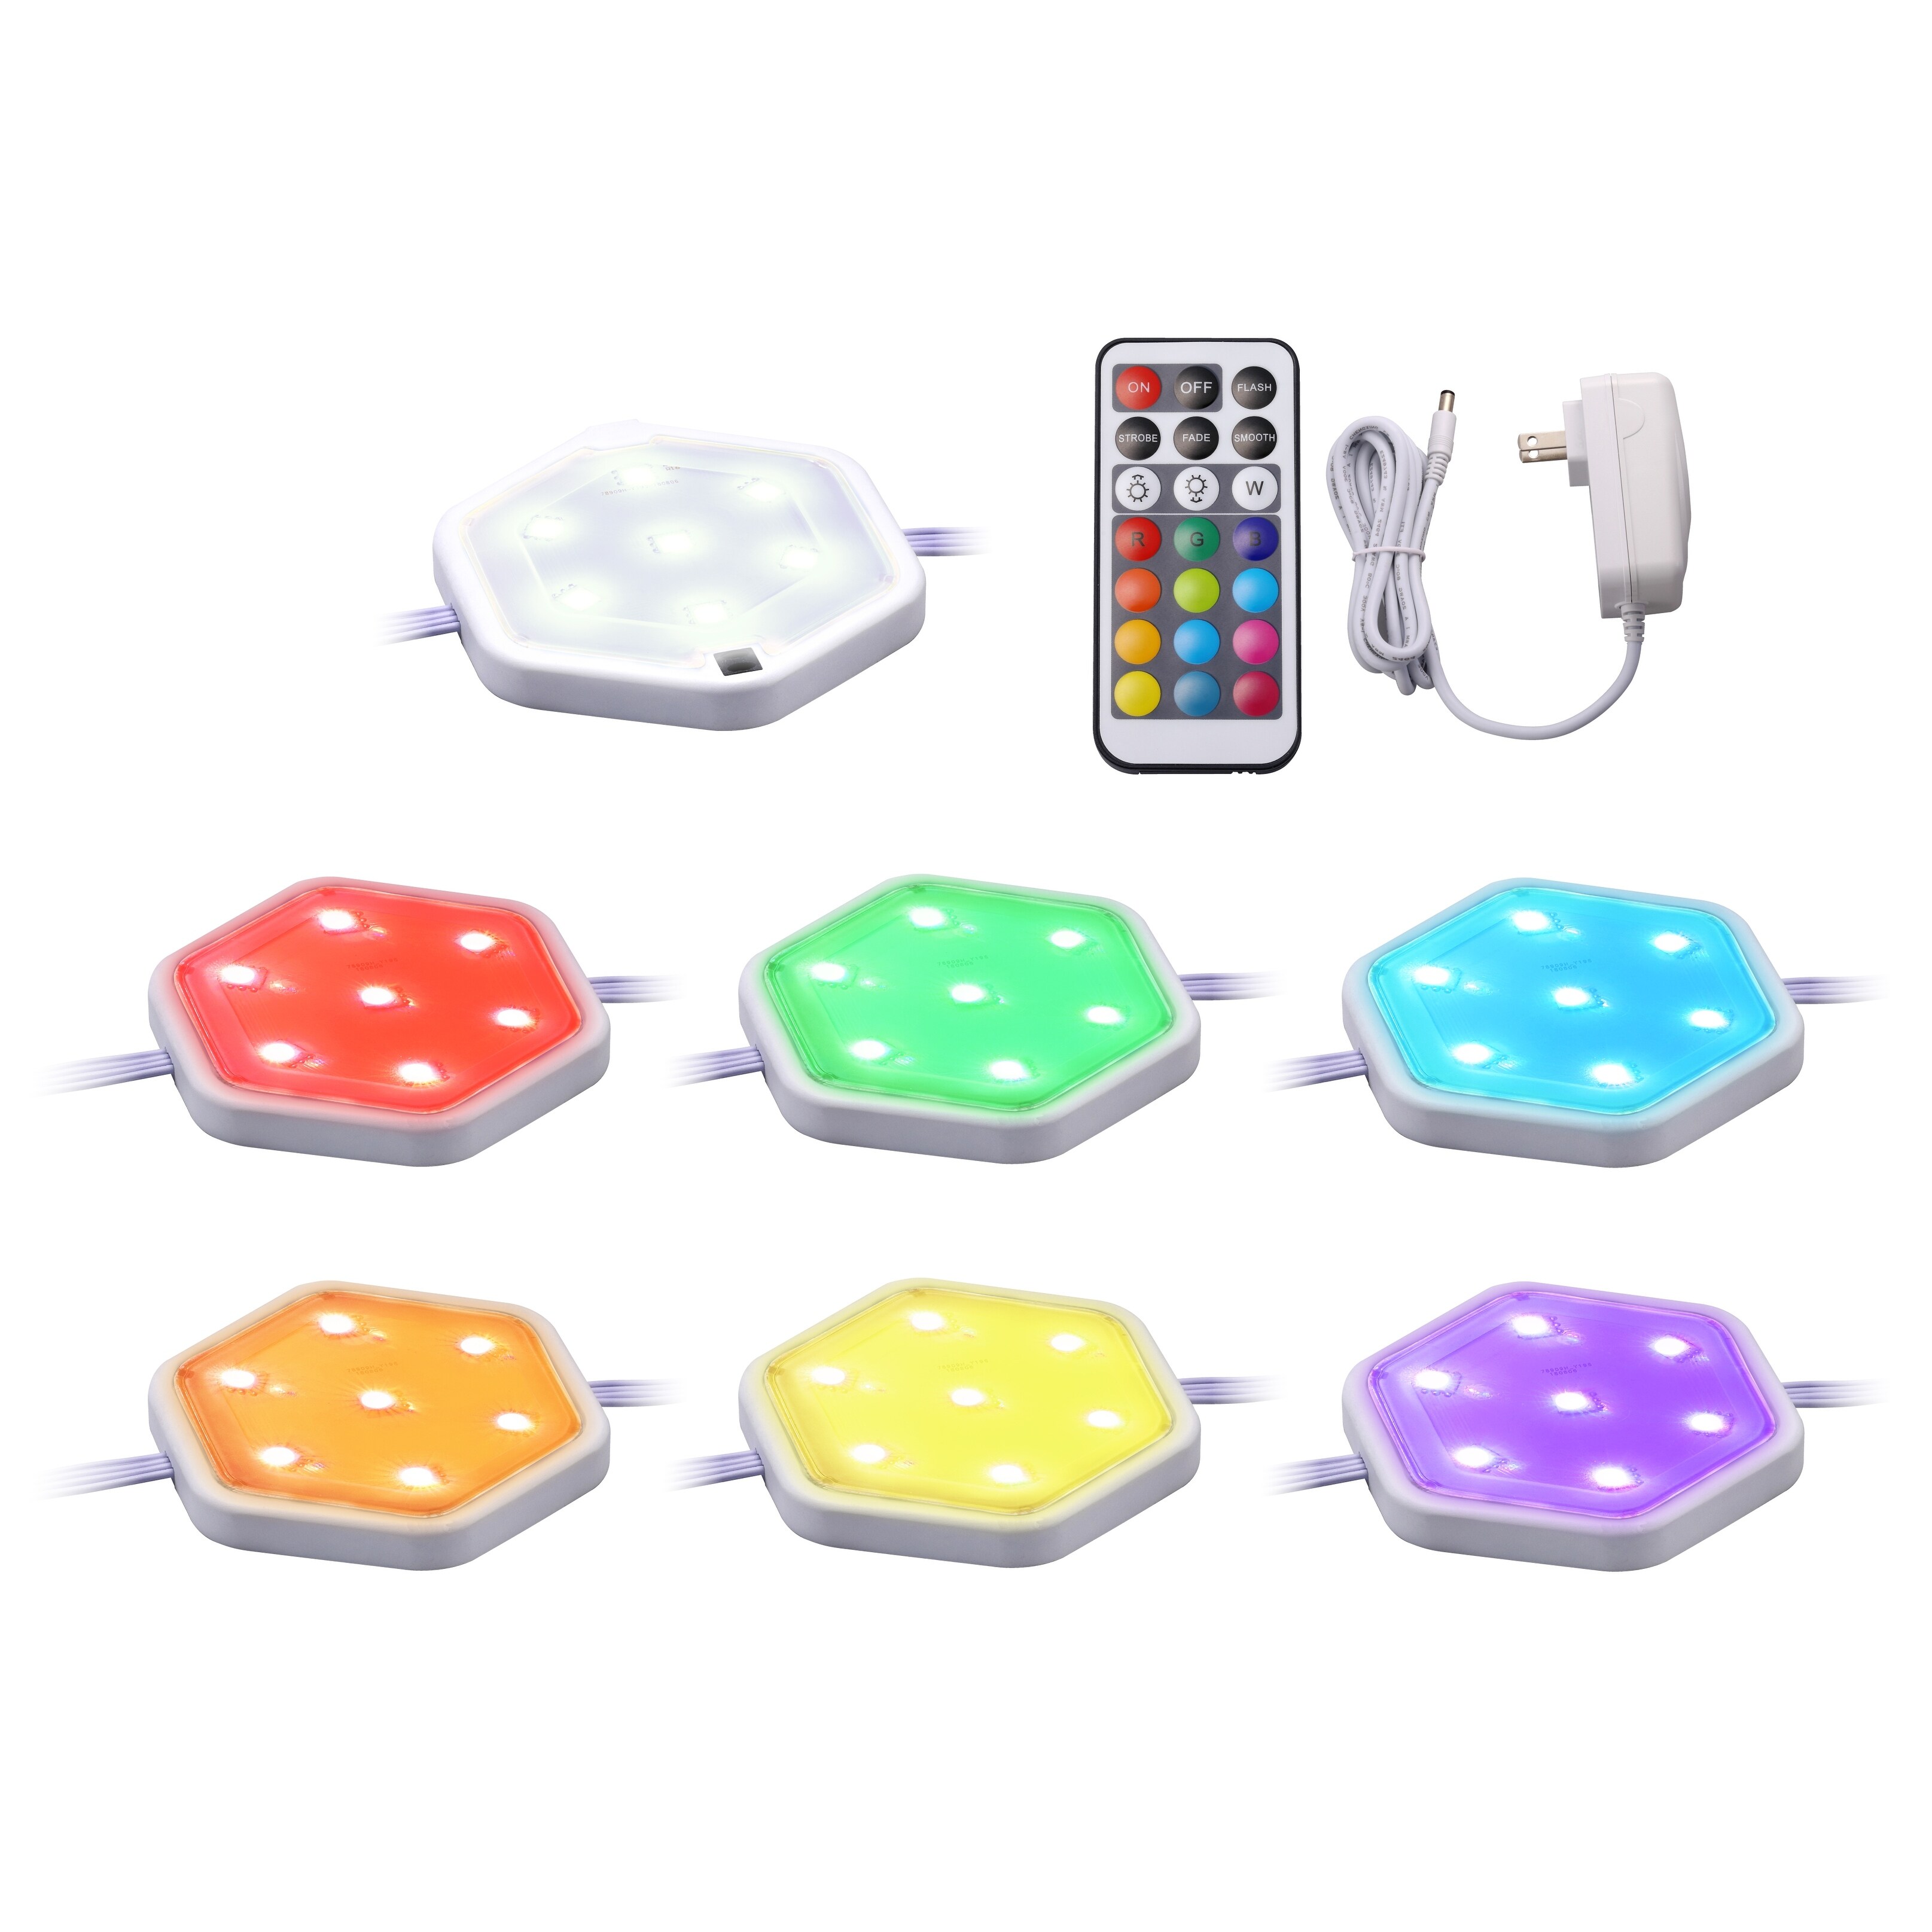 https://ak1.ostkcdn.com/images/products/is/images/direct/4aee7f4cfcb44140a6b50f8a32590deb461d4fae/BLACK%2BDECKER-Color-Changing-LED-Puck-Light-Kit-with-Remote%2C-RGB-%26-Cool-White.jpg